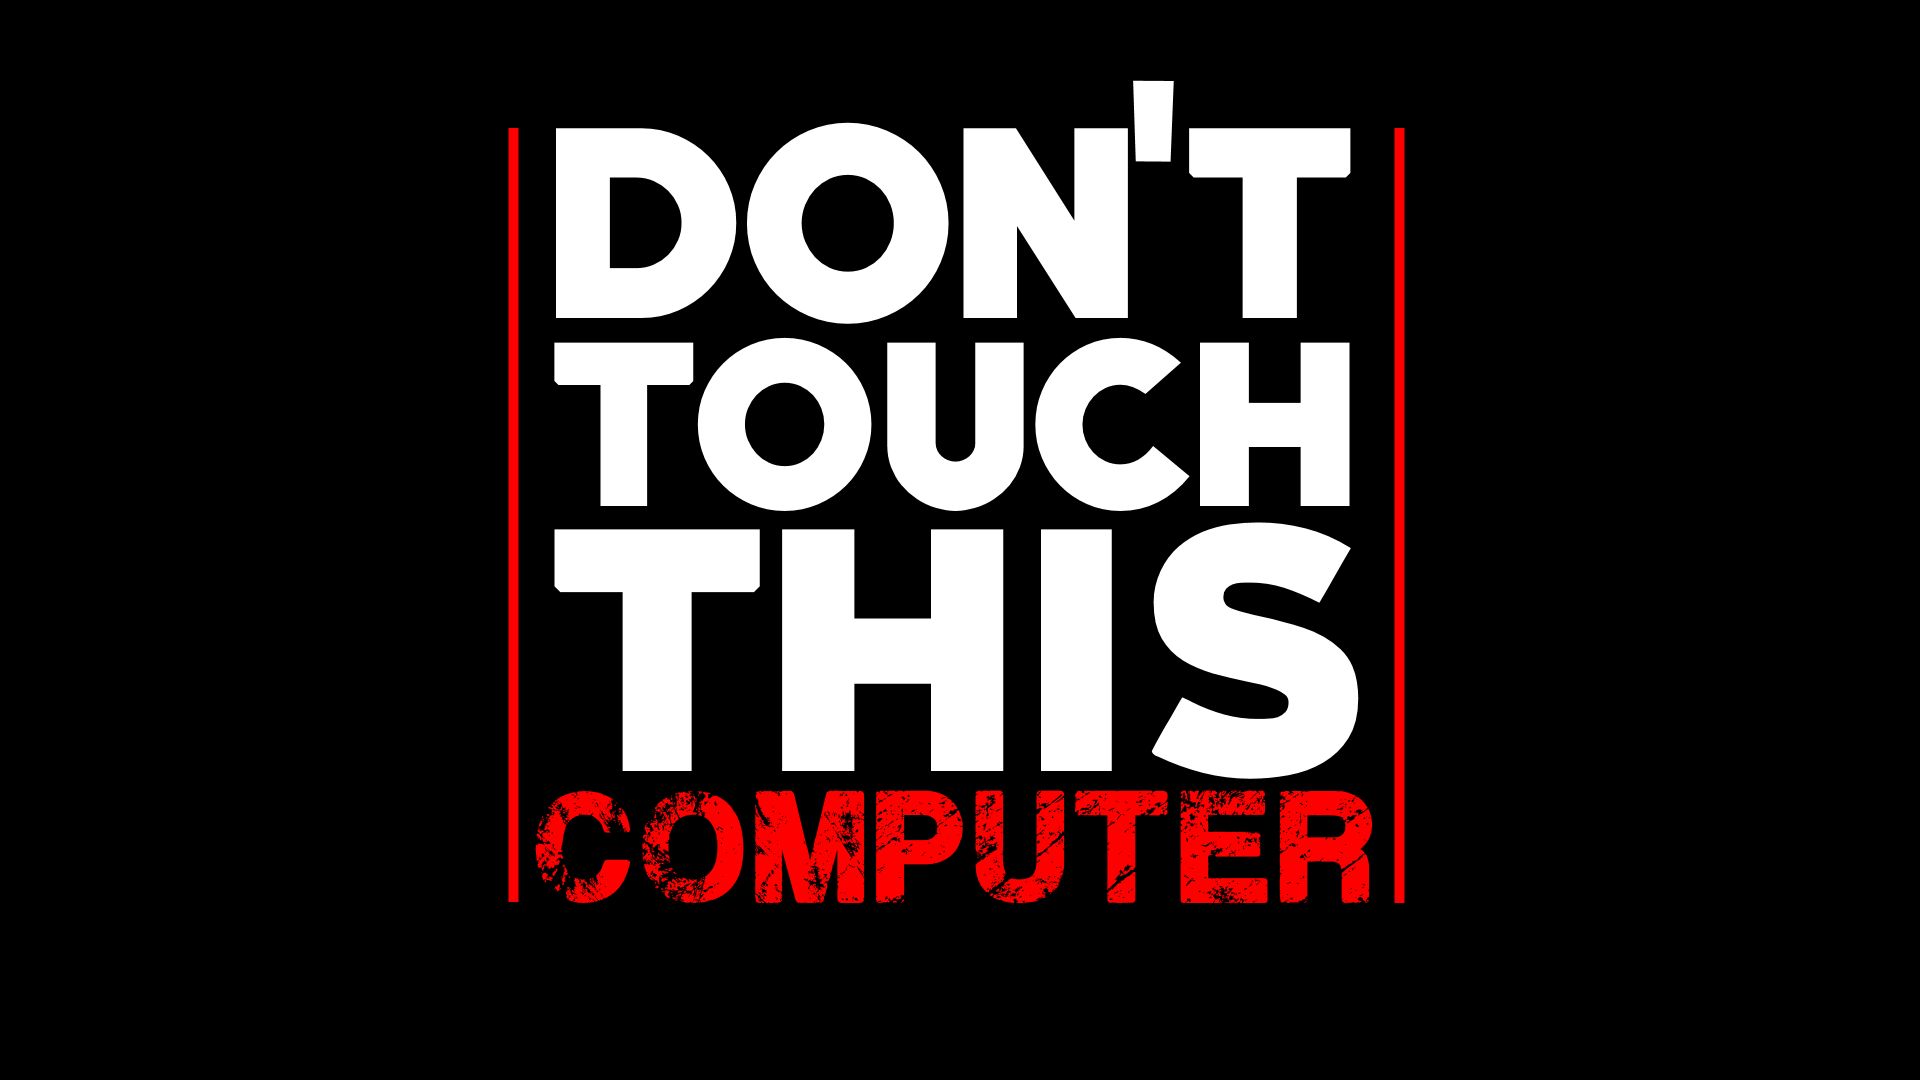 Don't Touch This Computer Computer Wallpaper, Desktop Background